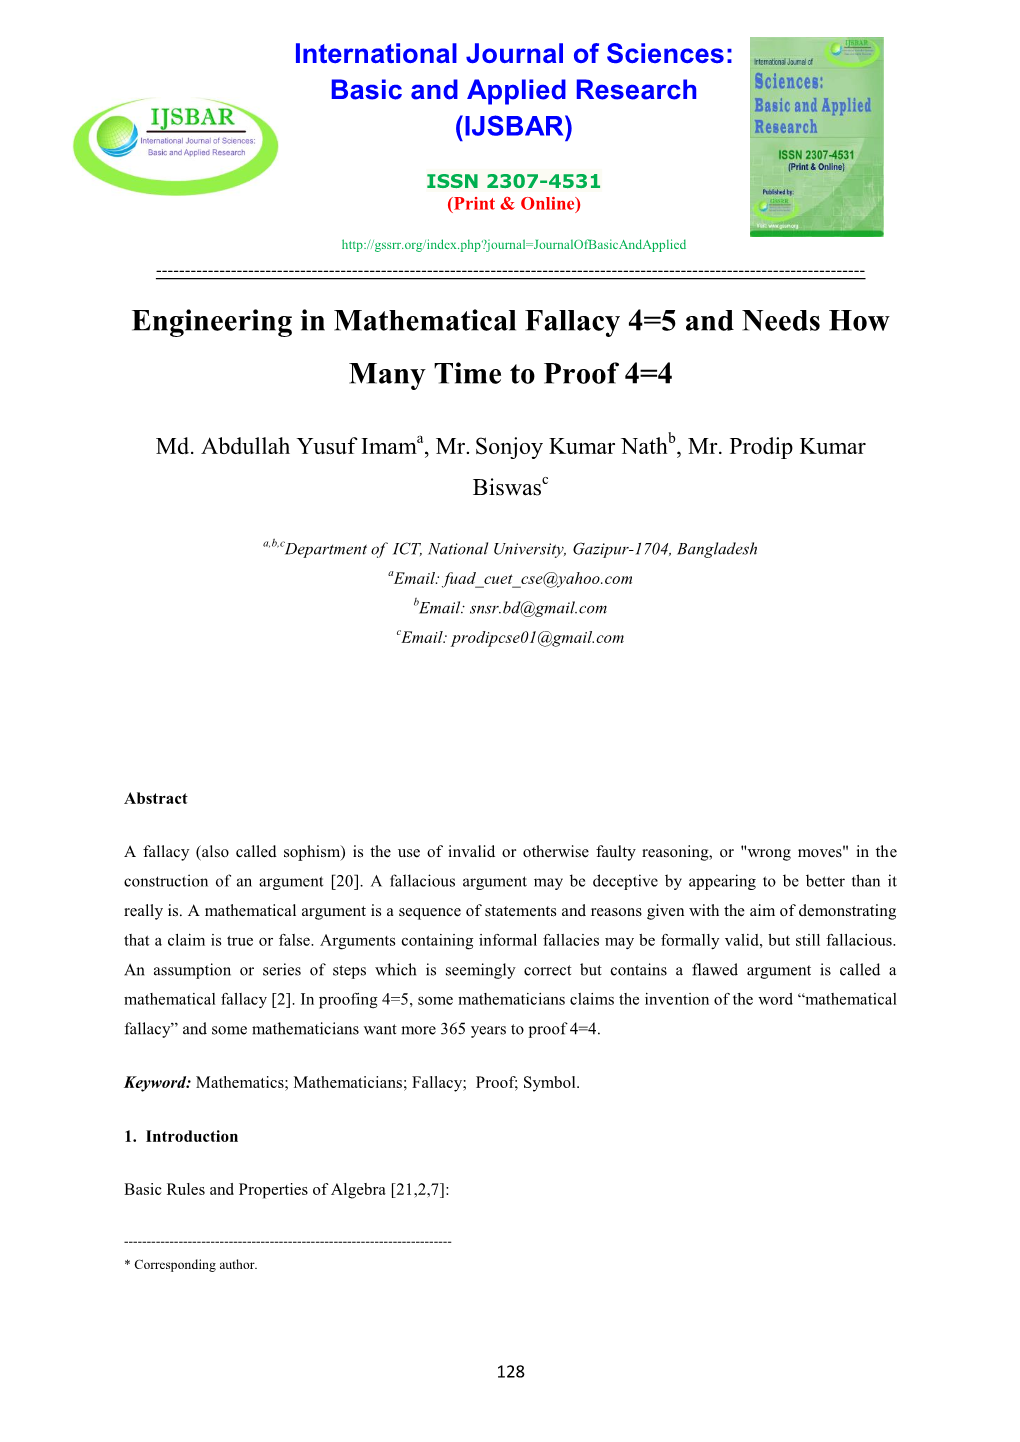 Engineering in Mathematical Fallacy 4=5 and Needs How Many Time to Proof 4=4